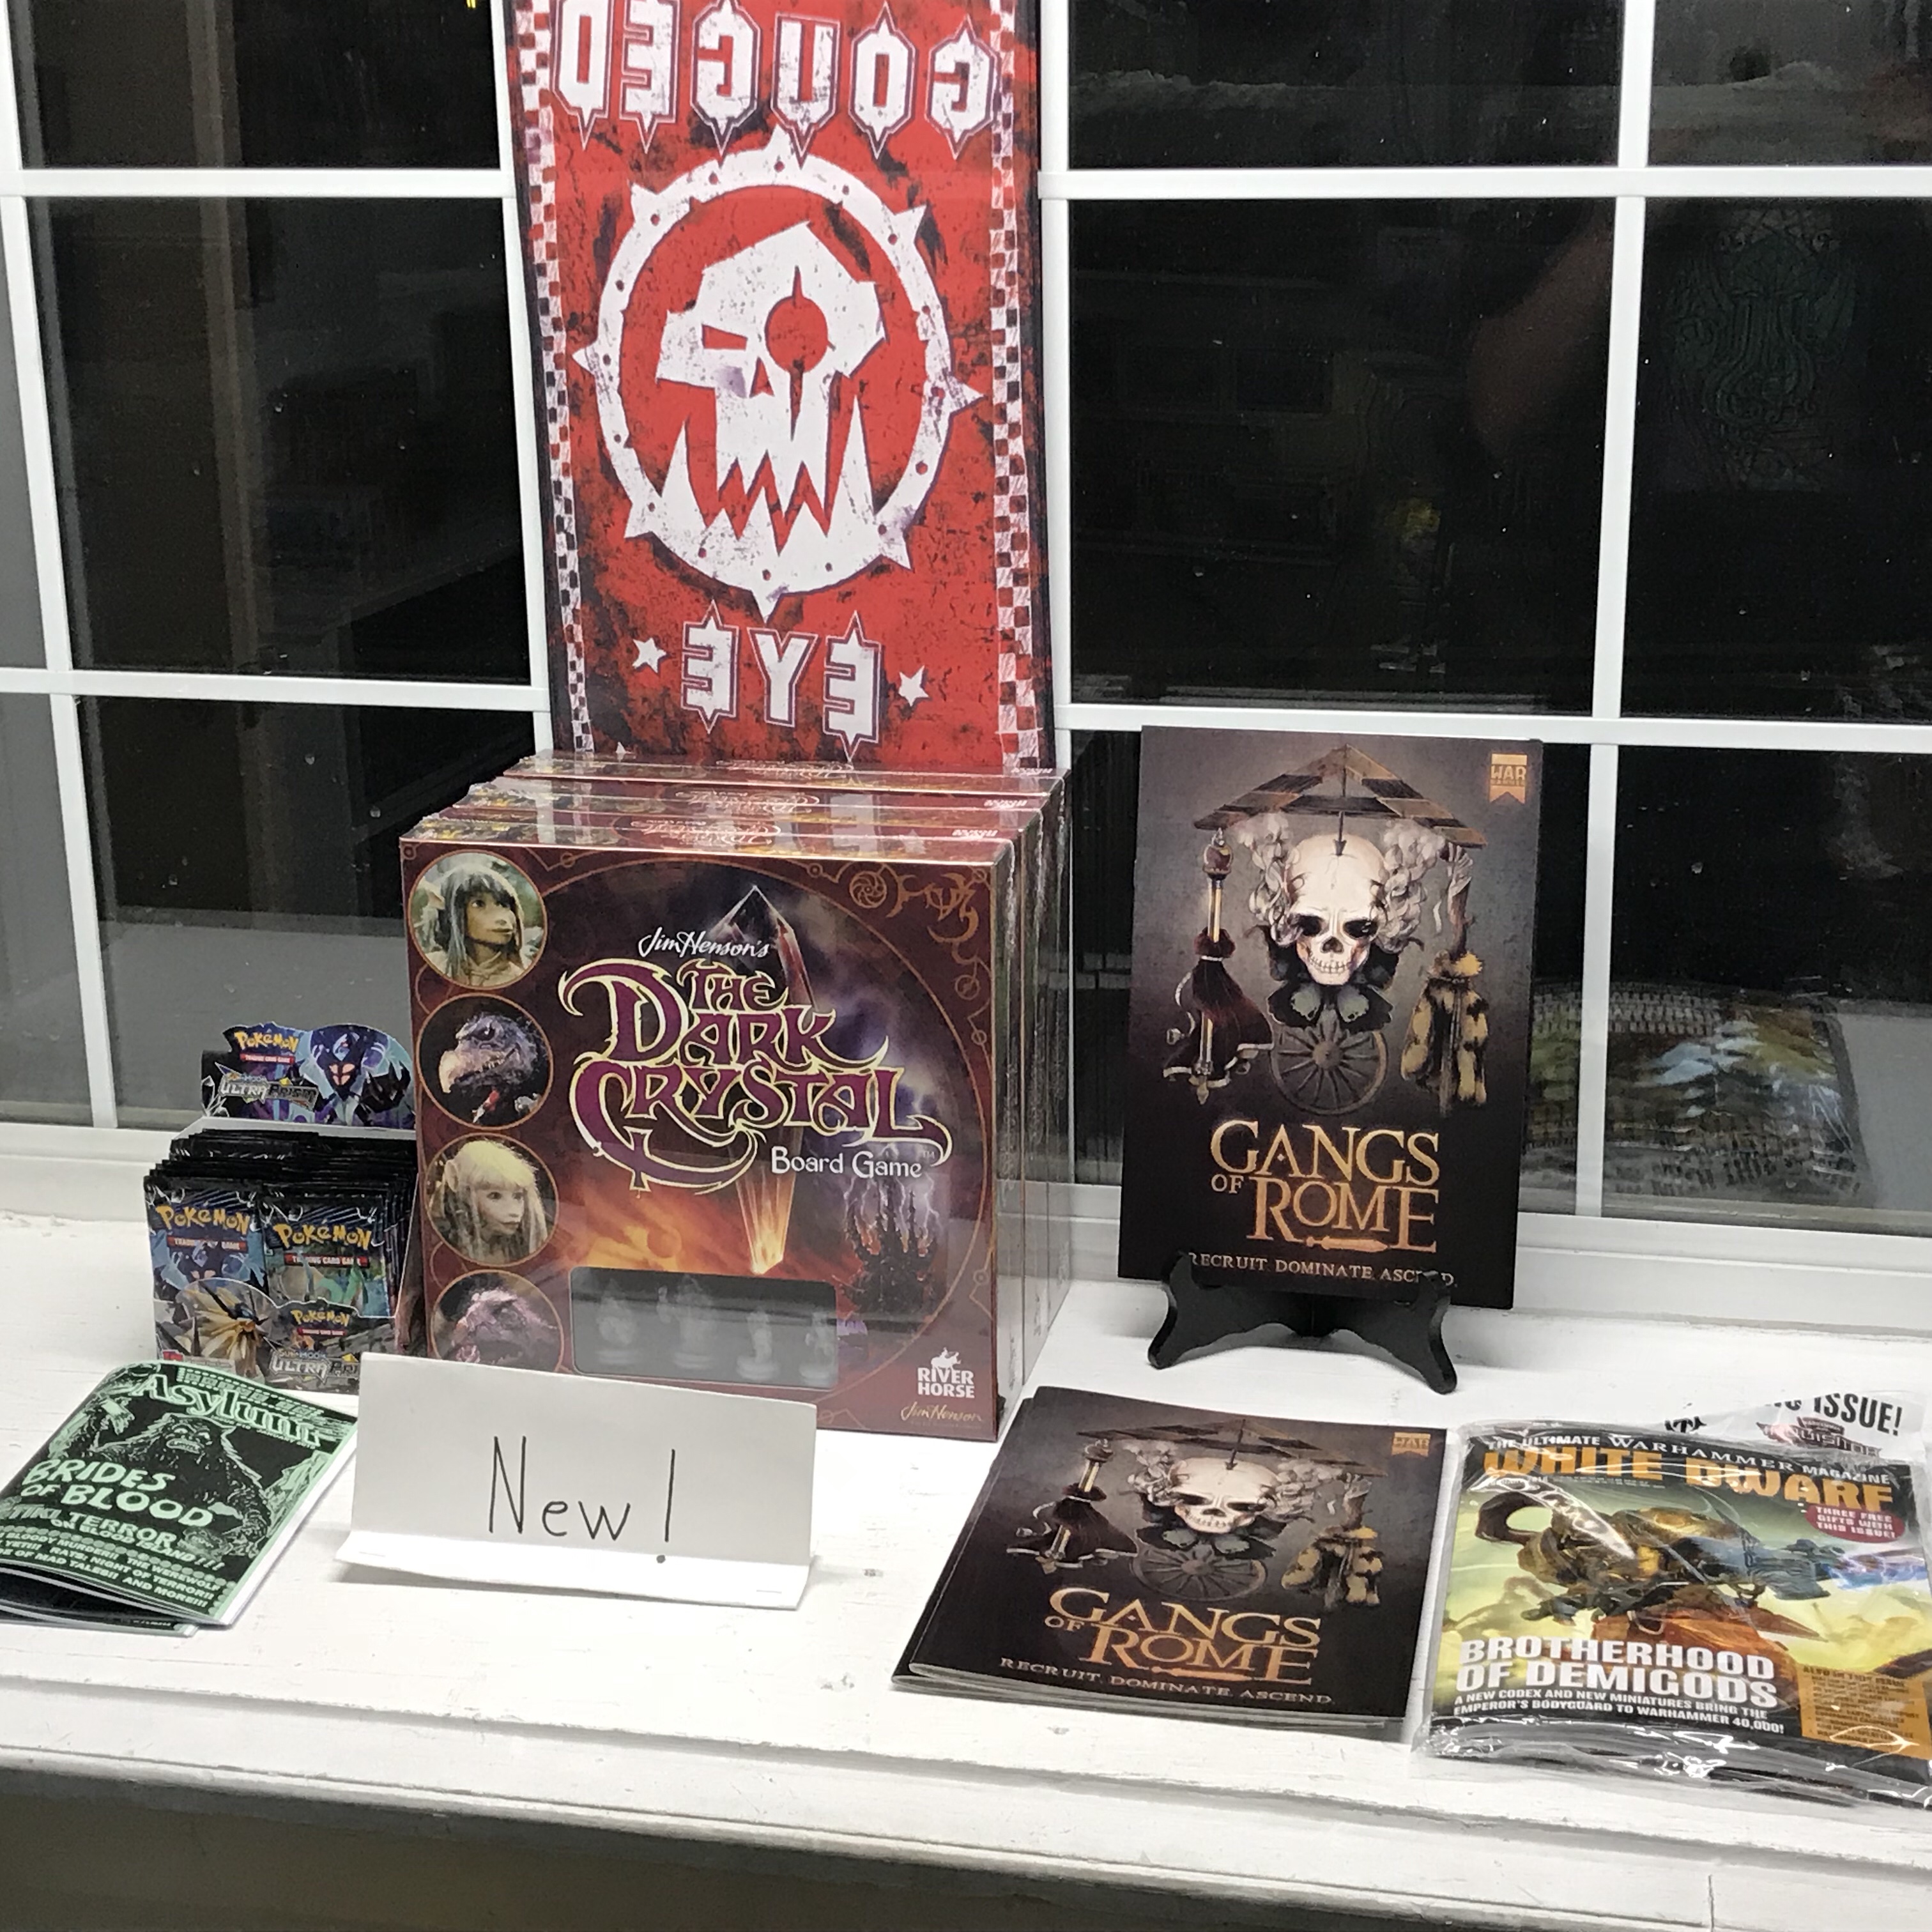 The Dark Crystal Board Game, Gangs of Rome, and Pokémon Ultra Prism